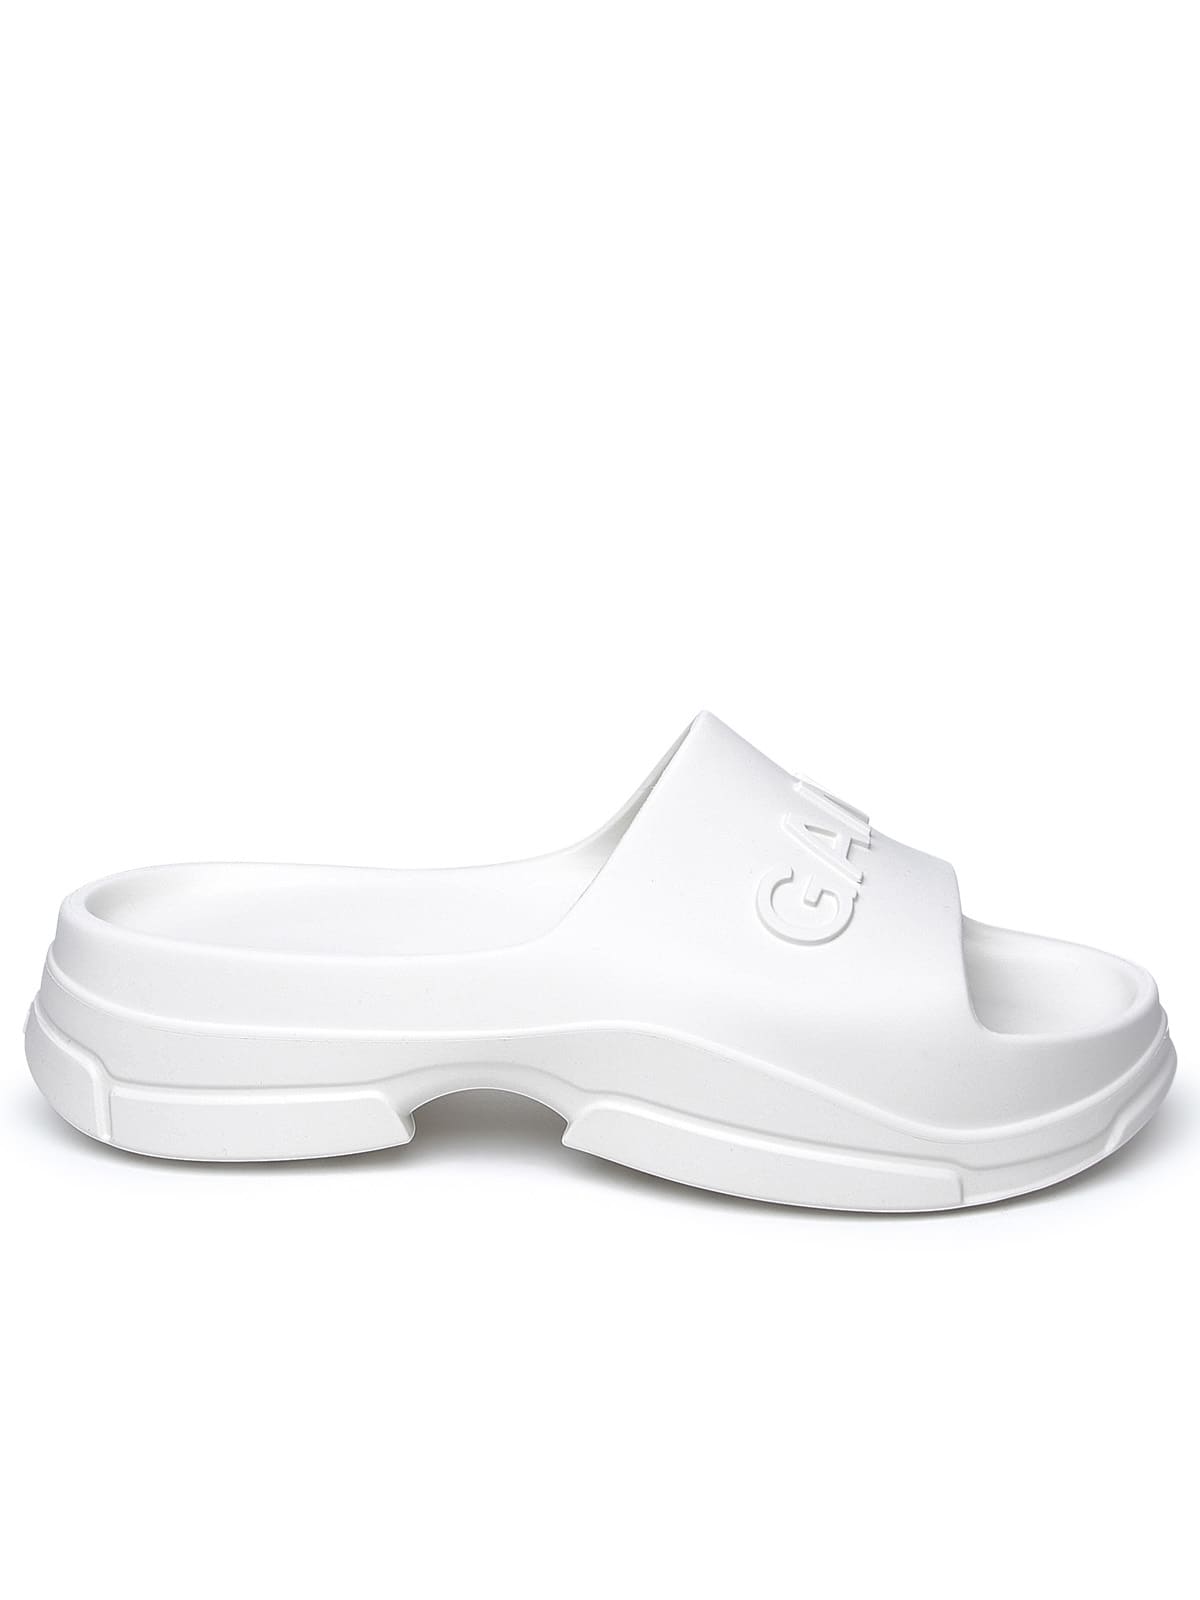 White Rubber Slippers